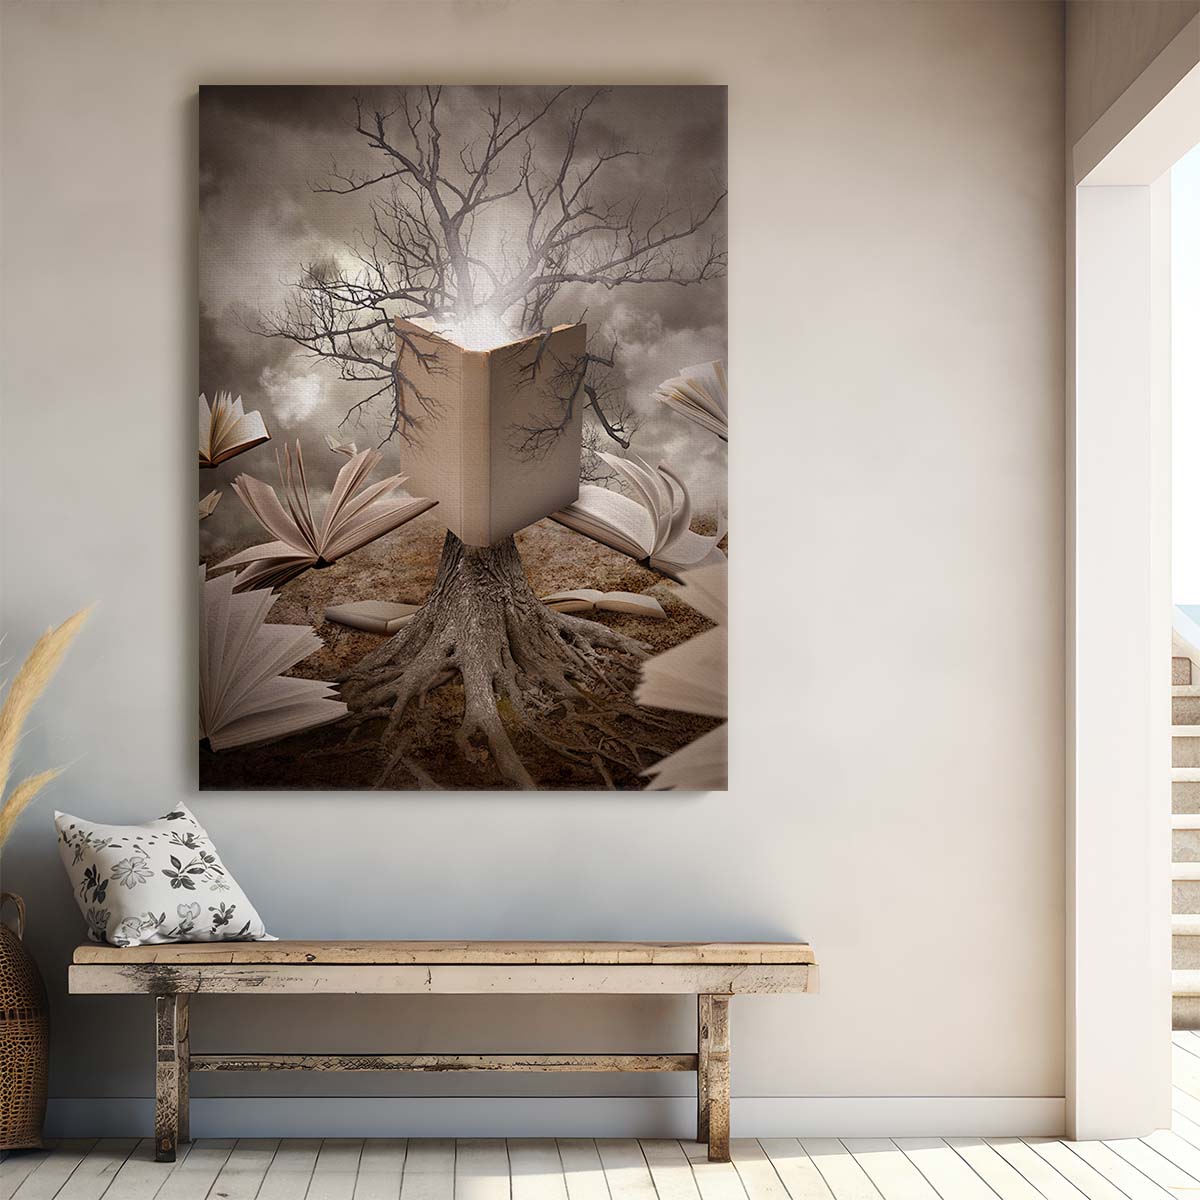 Surreal Old Tree Reading Book Photography Wall Art - Creative Edit by Luxuriance Designs, made in USA